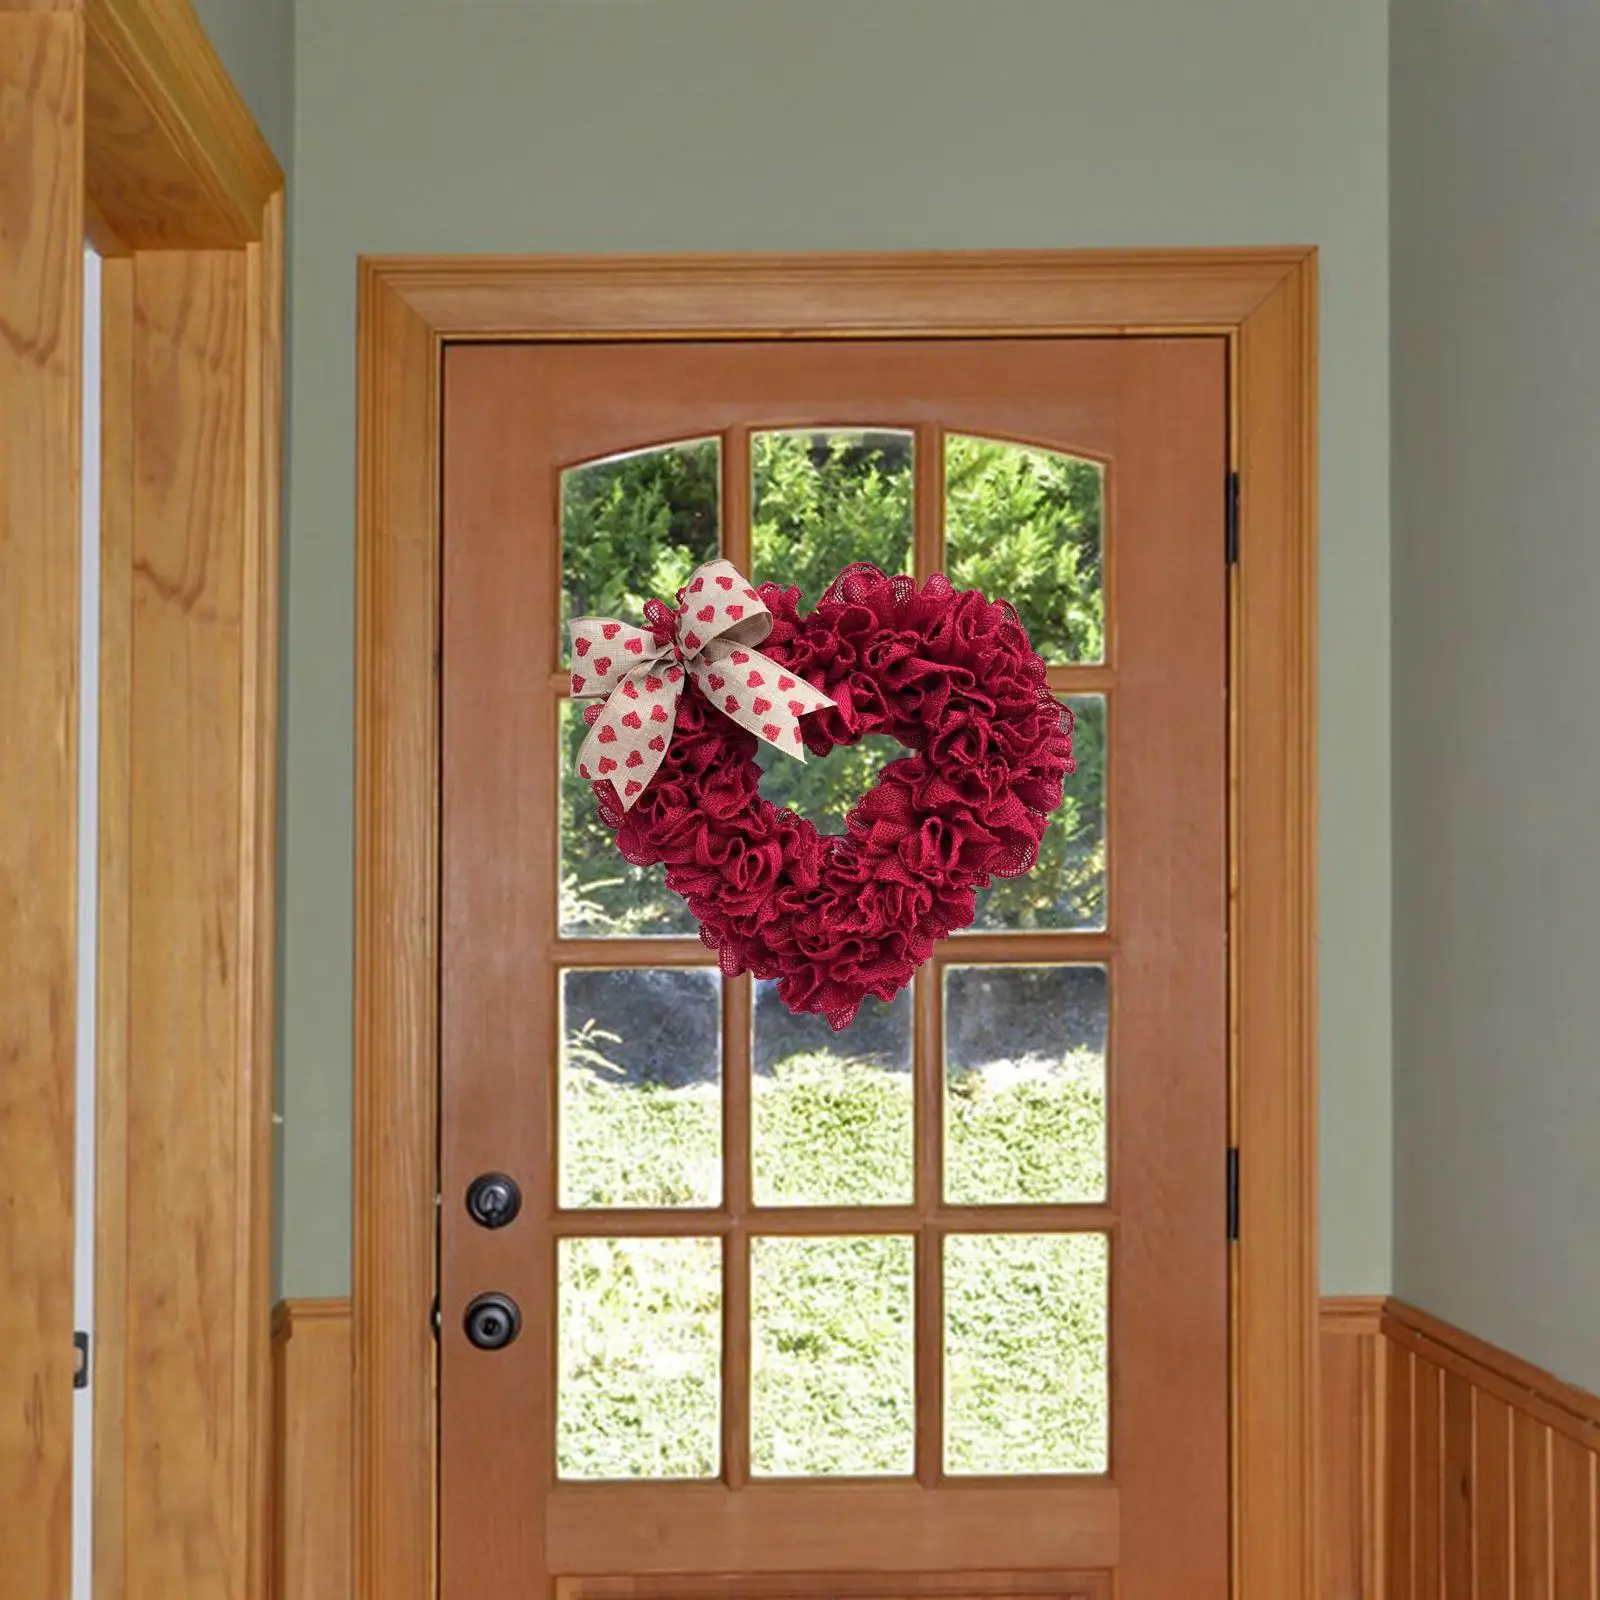 40cm Valentine`S Day Wreath Door Hanging Heart Shaped Wreaths Ornaments for Holiday Garden Celebration Festival Decor